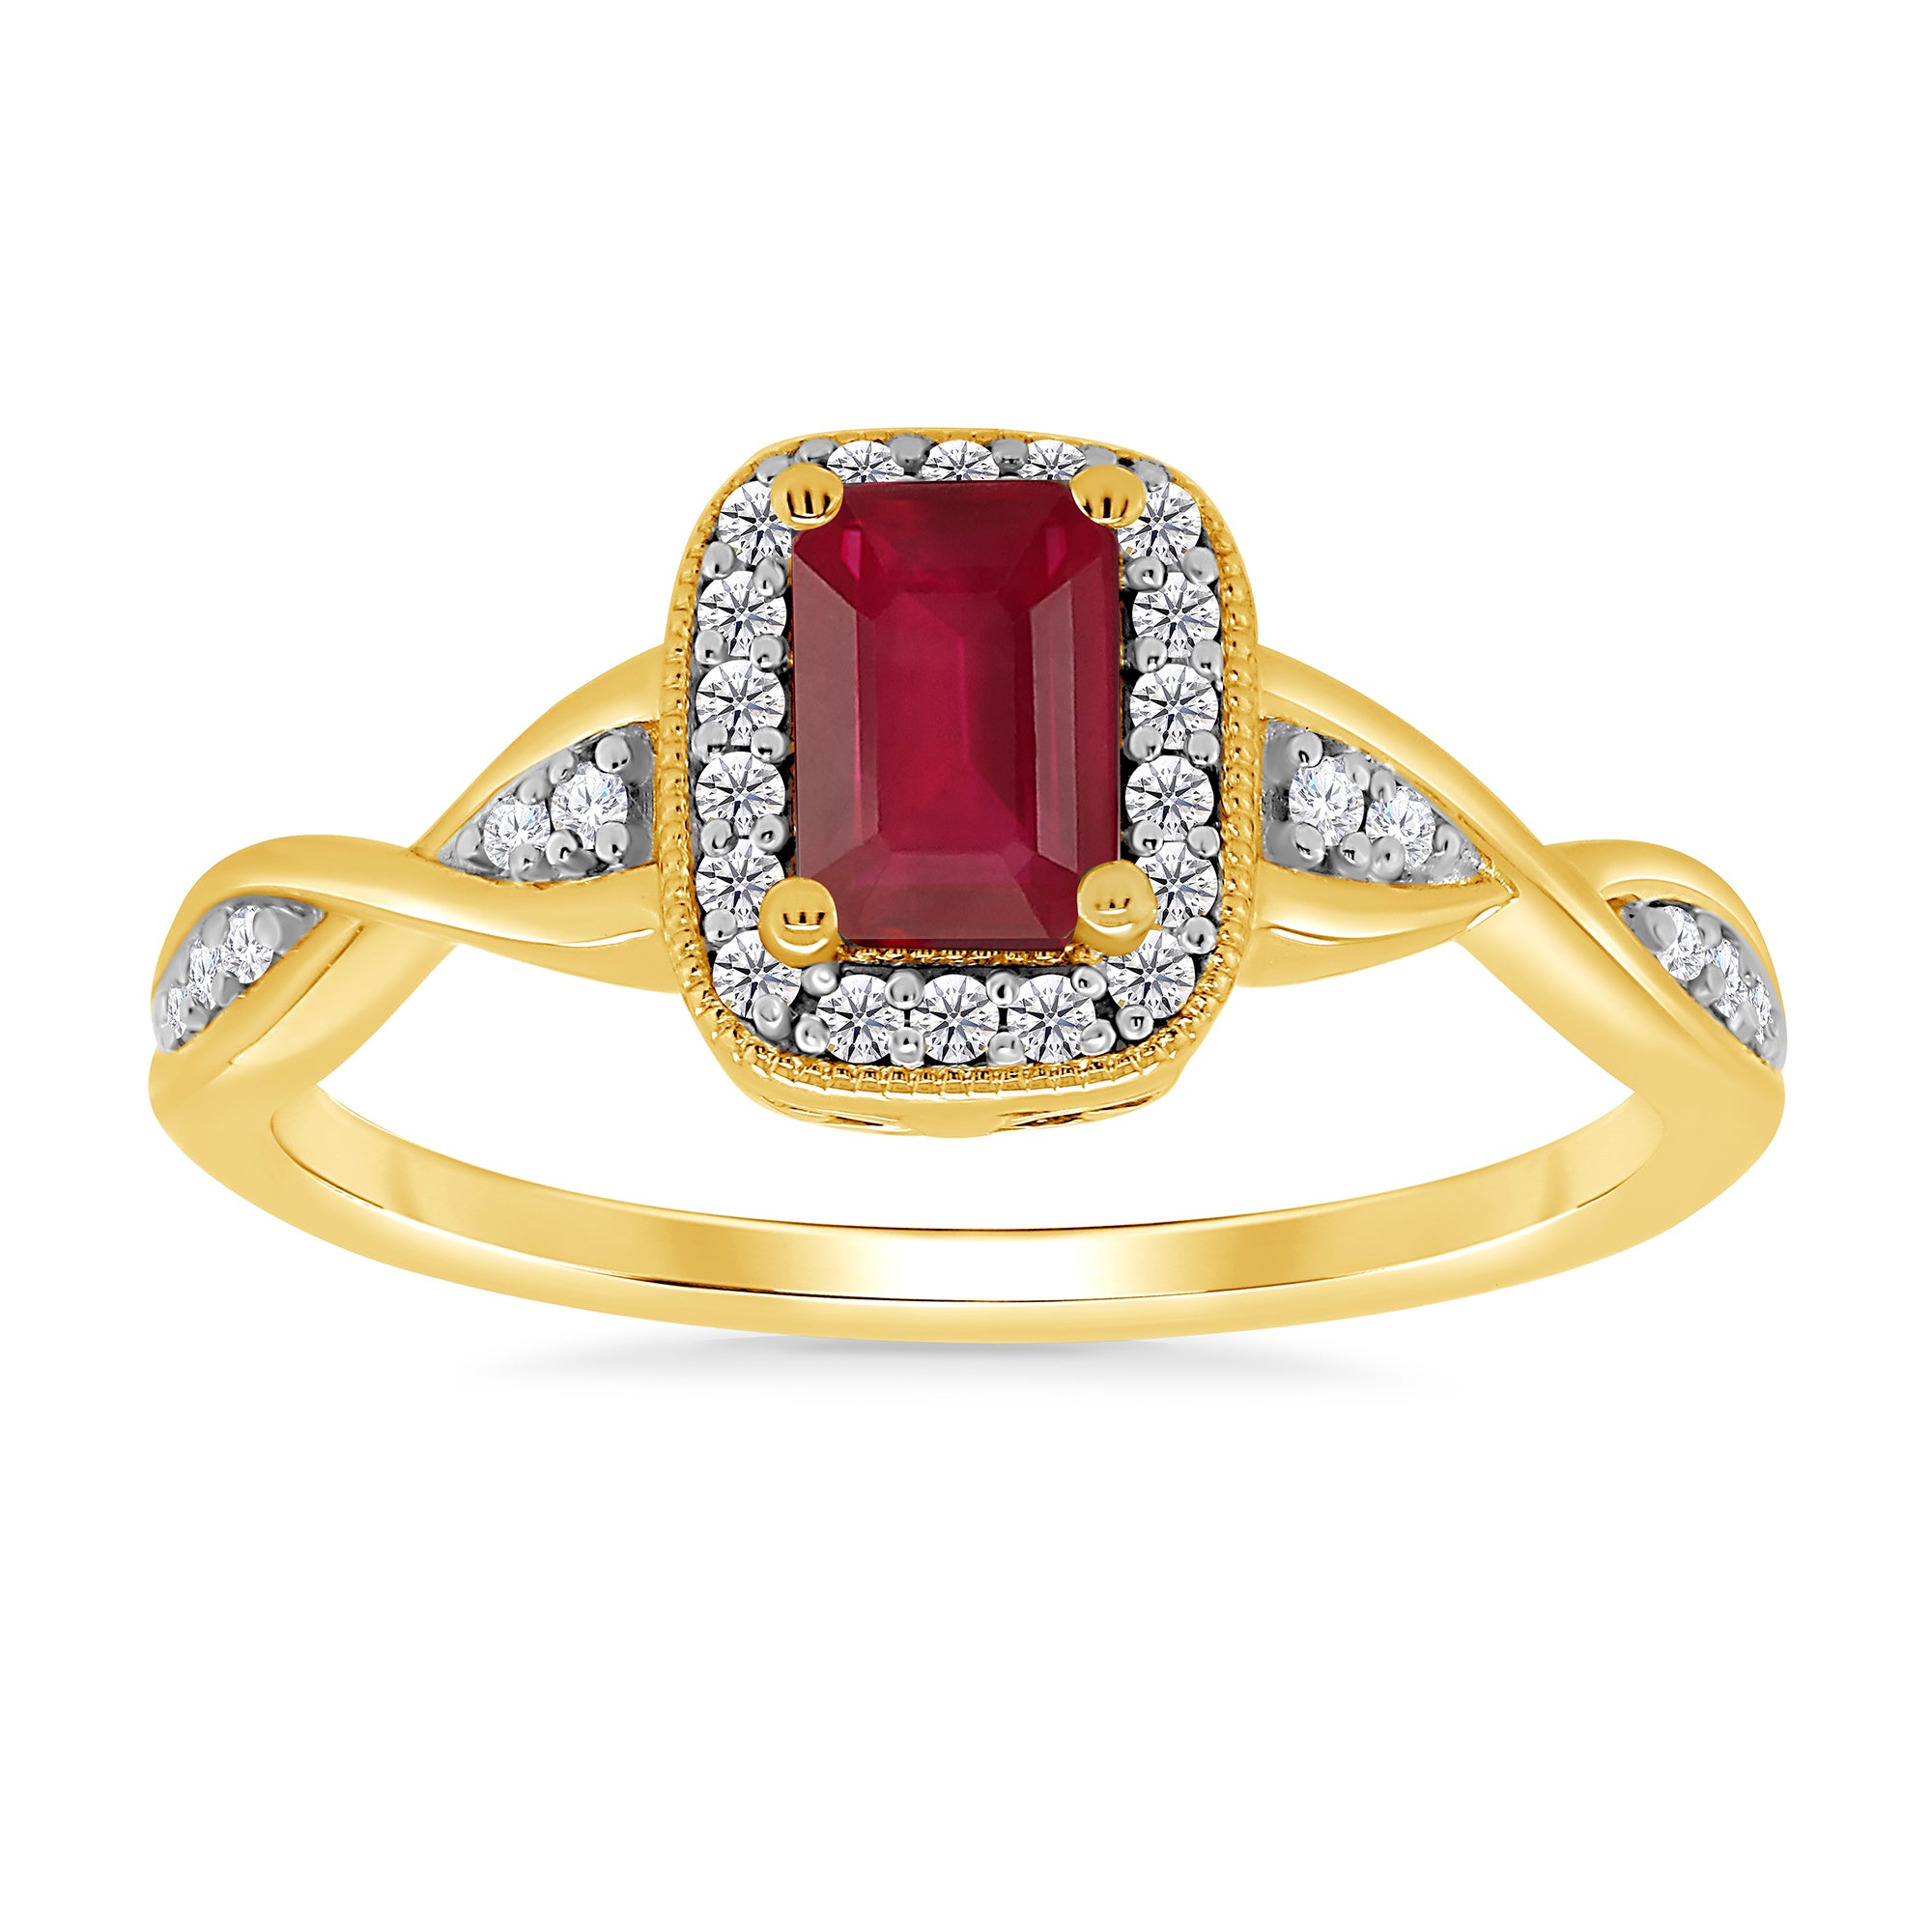 9ct gold 6x4mm octagon ruby & diamond cluster ring 0.14ct